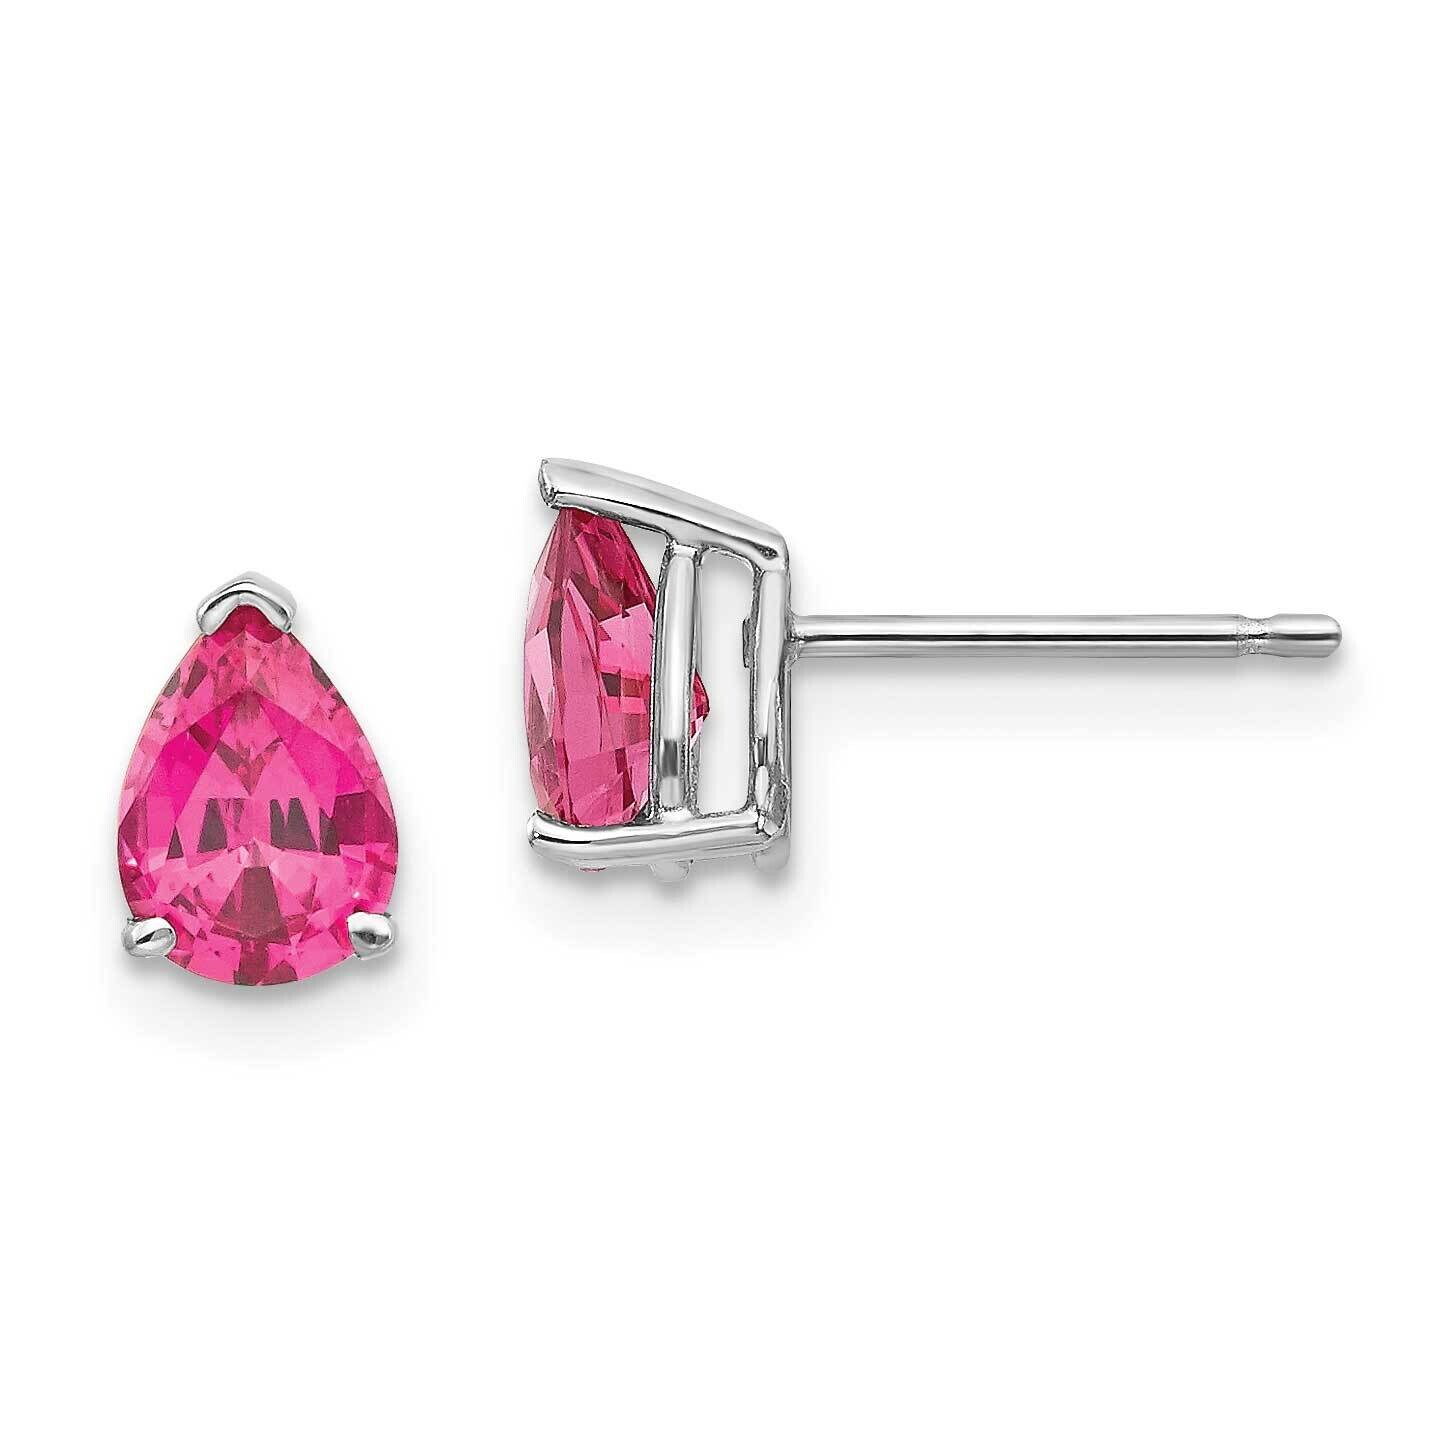 Pink Spinel Earrings 14k White Gold XE80WSK-A